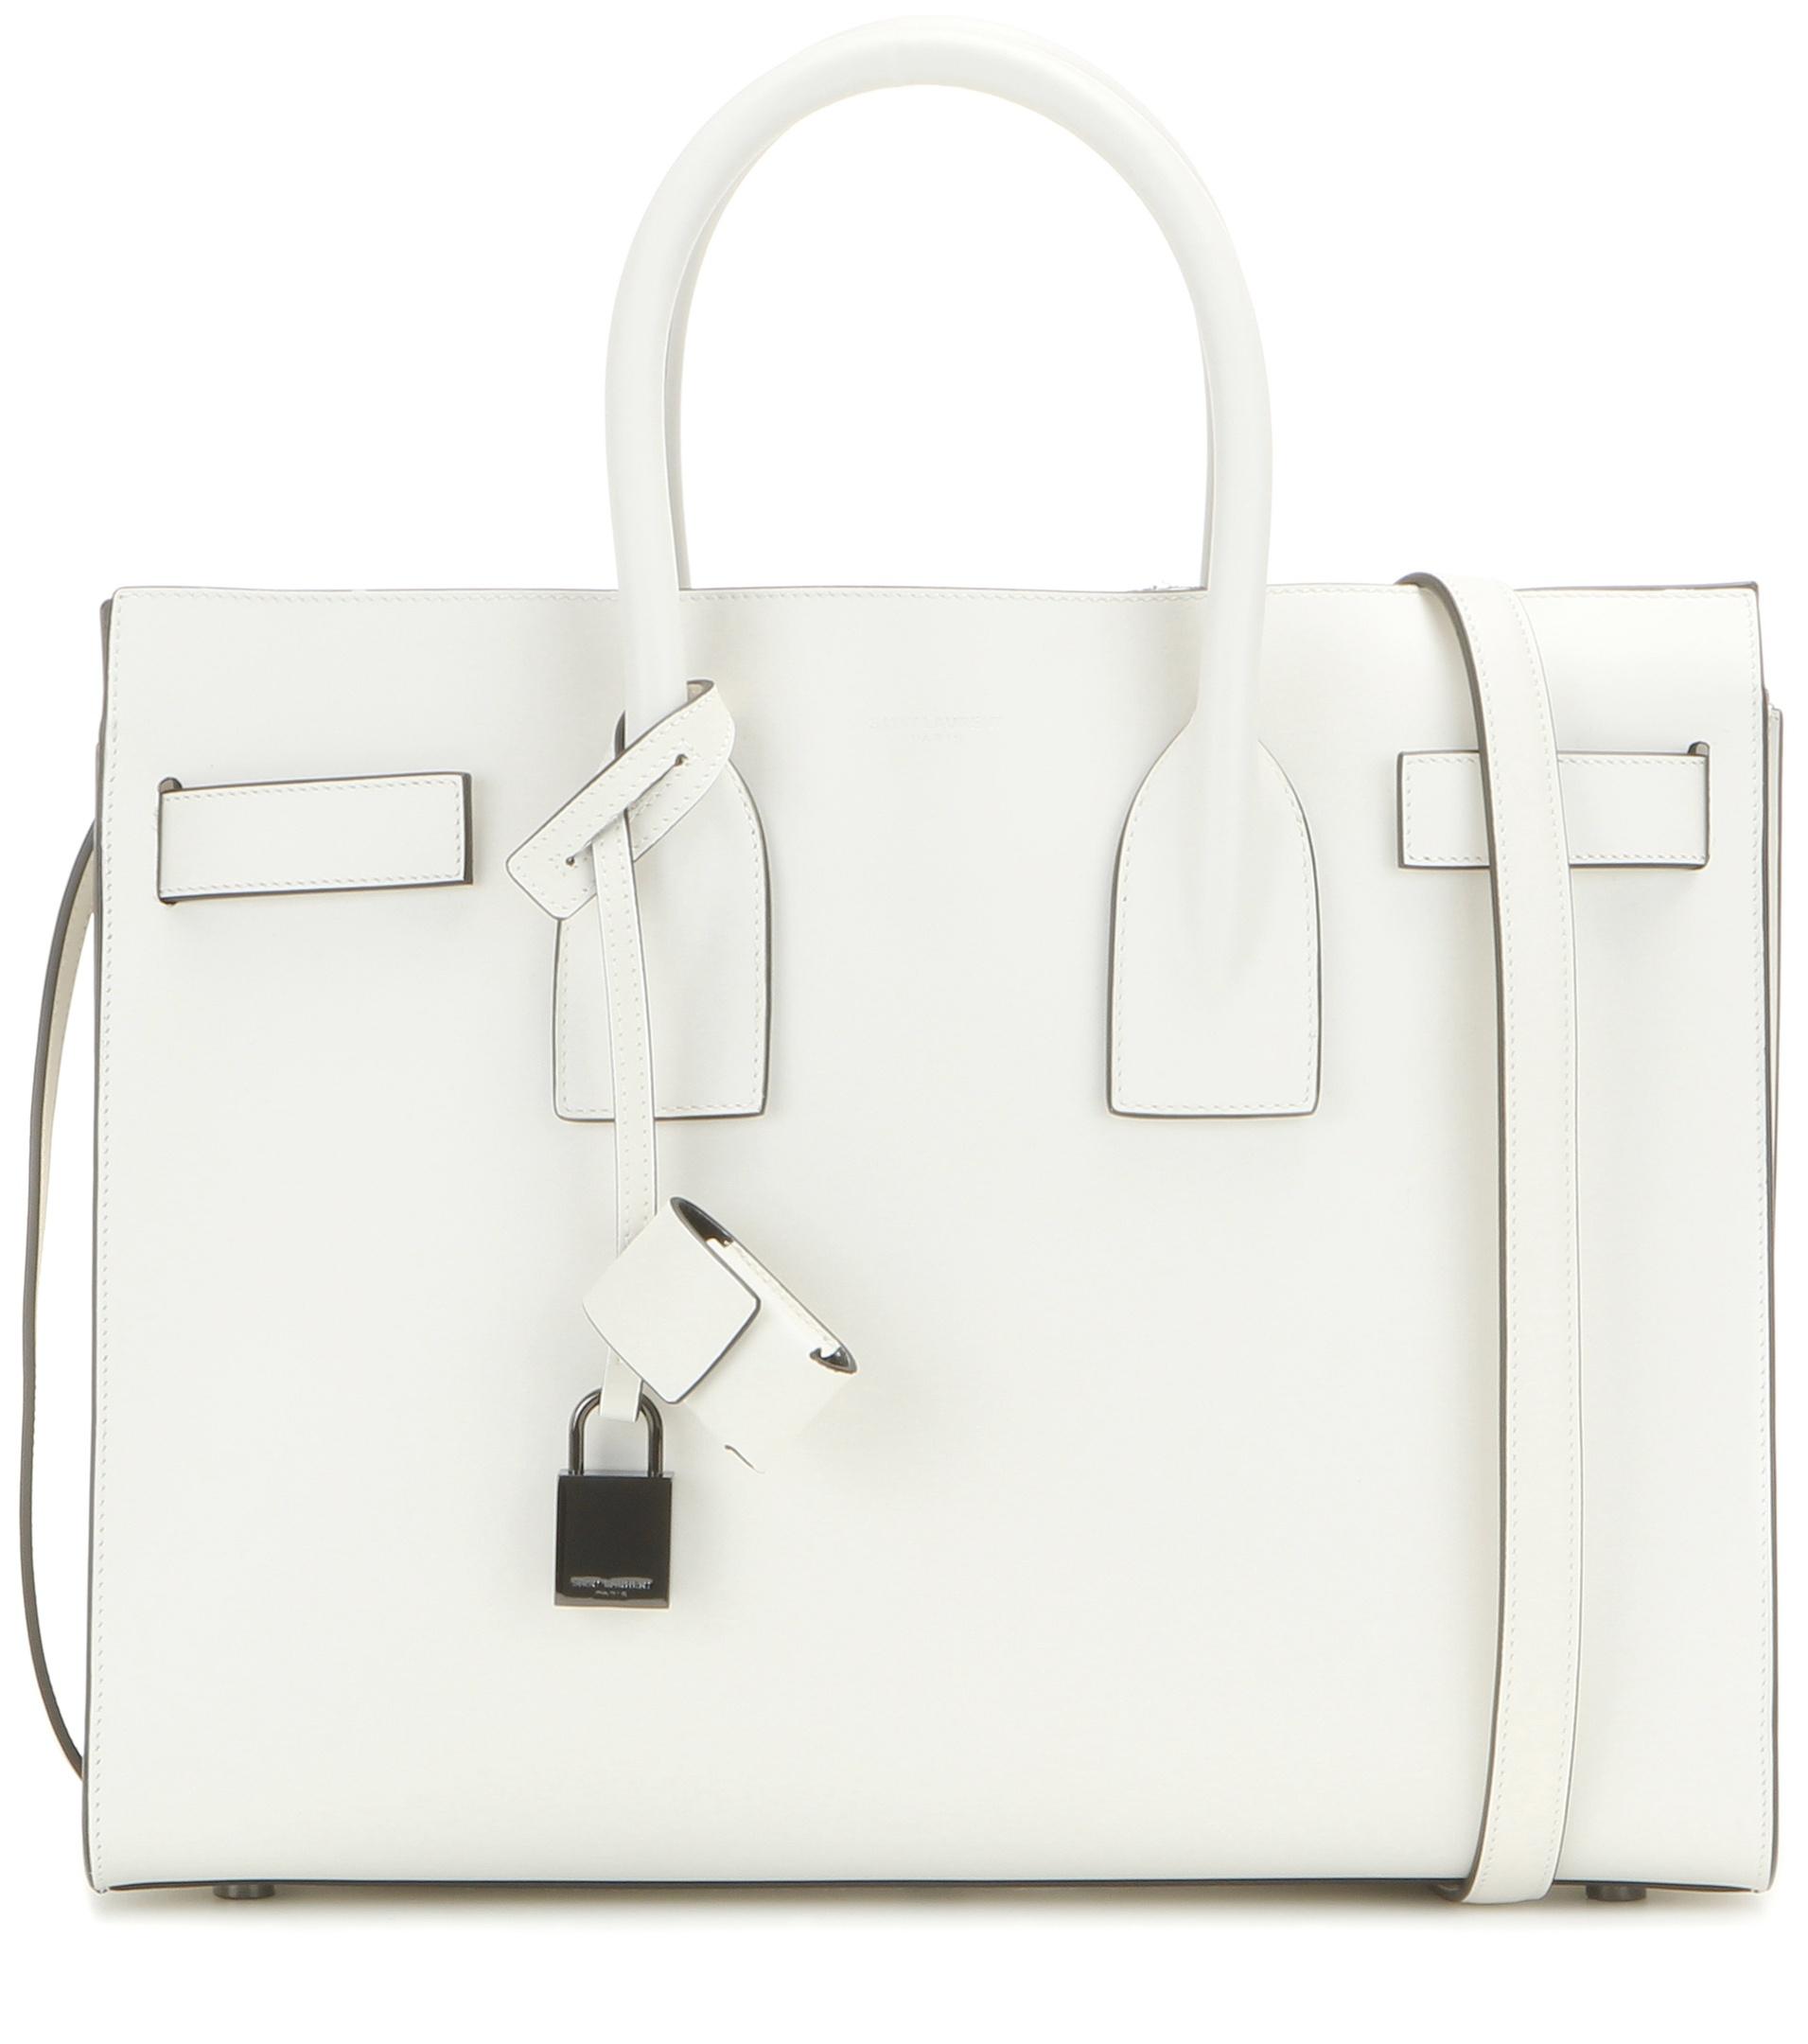 Saint laurent Sac De Jour Small Leather Tote in White | Lyst